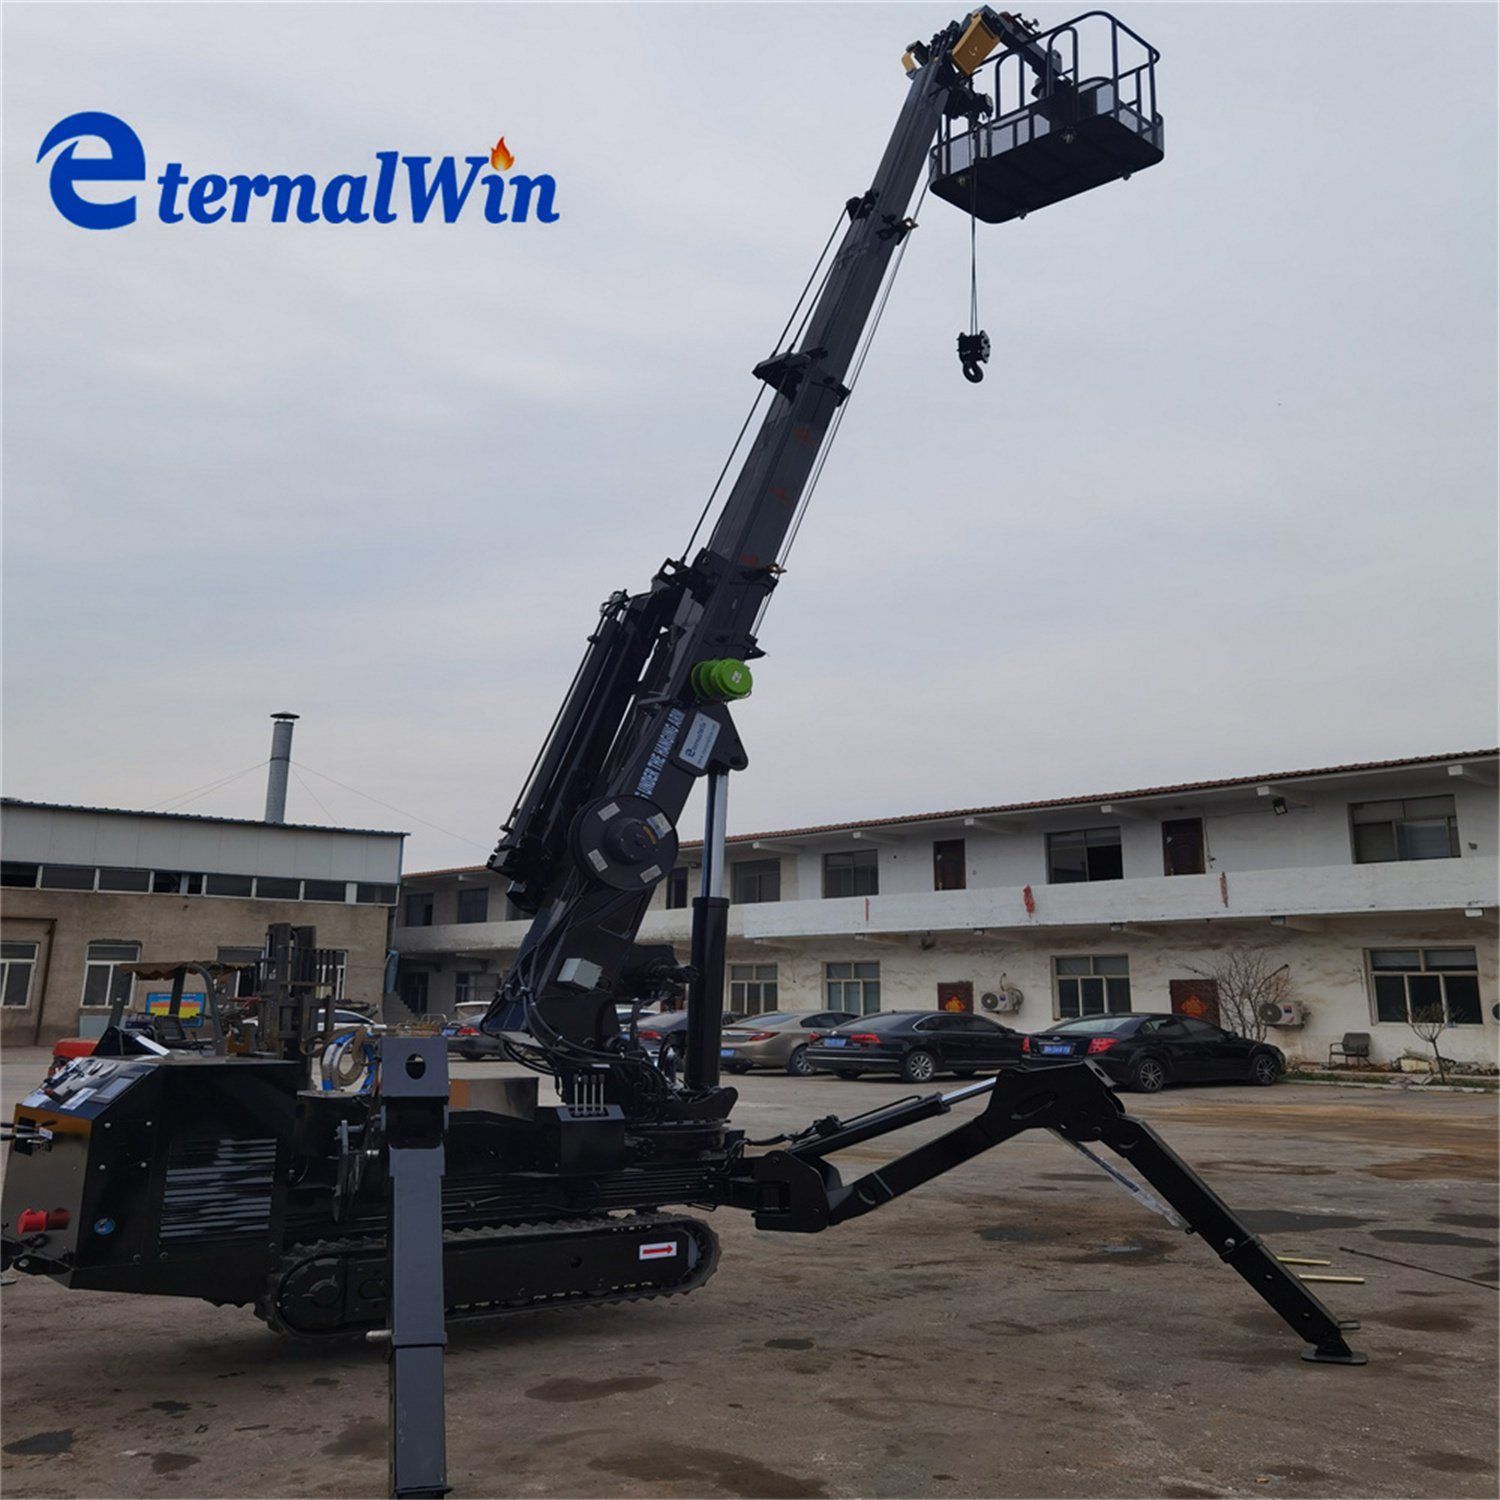 Crawler Spider Platforms Can Be Used in Harsh Environments Spider Crane